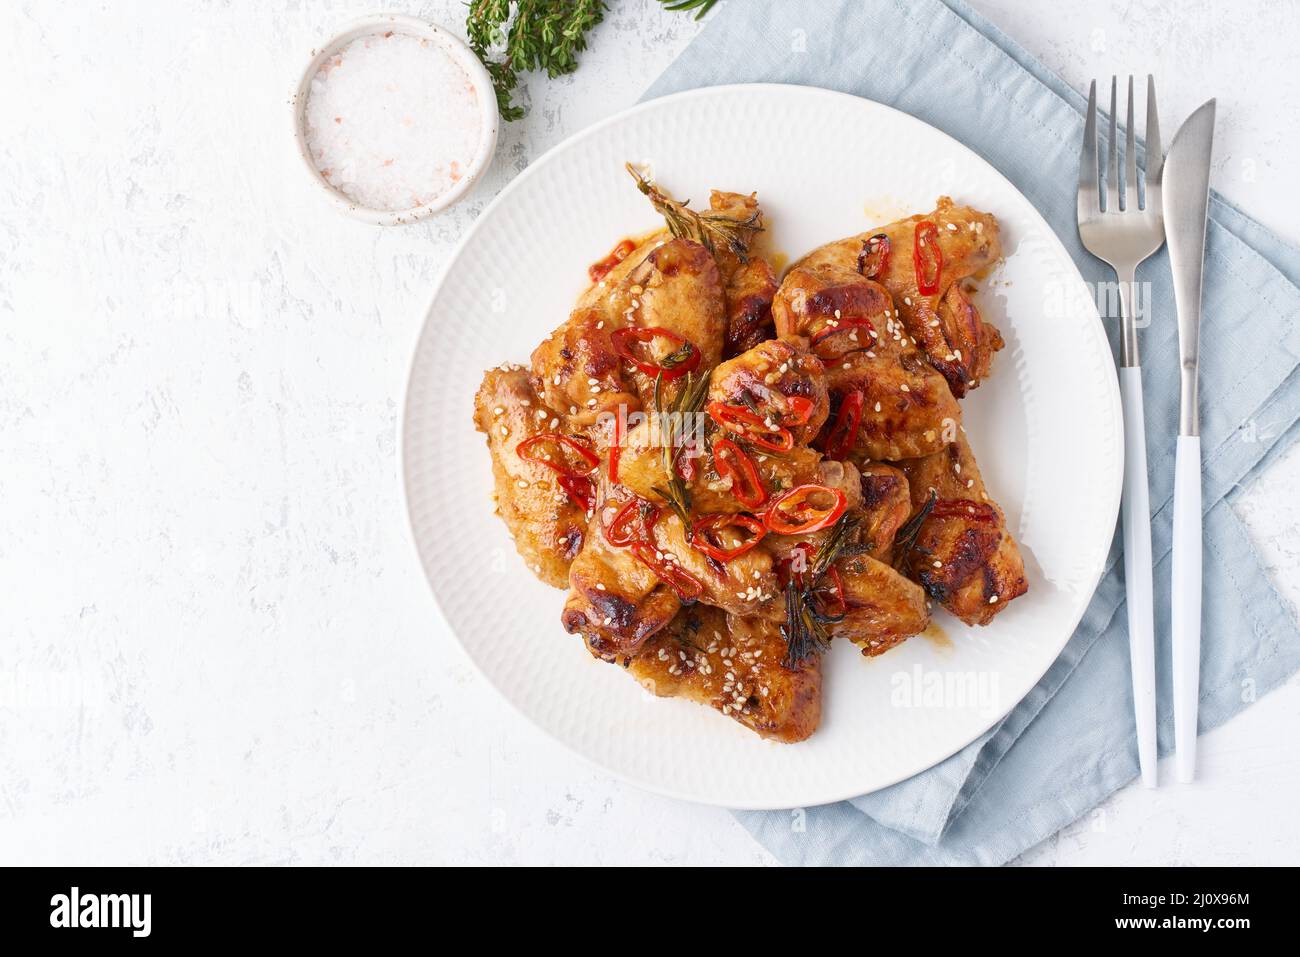 Barbecue chicken wings. Oven baked chiken on plate. Hot korean food. Top view, copy space Stock Photo